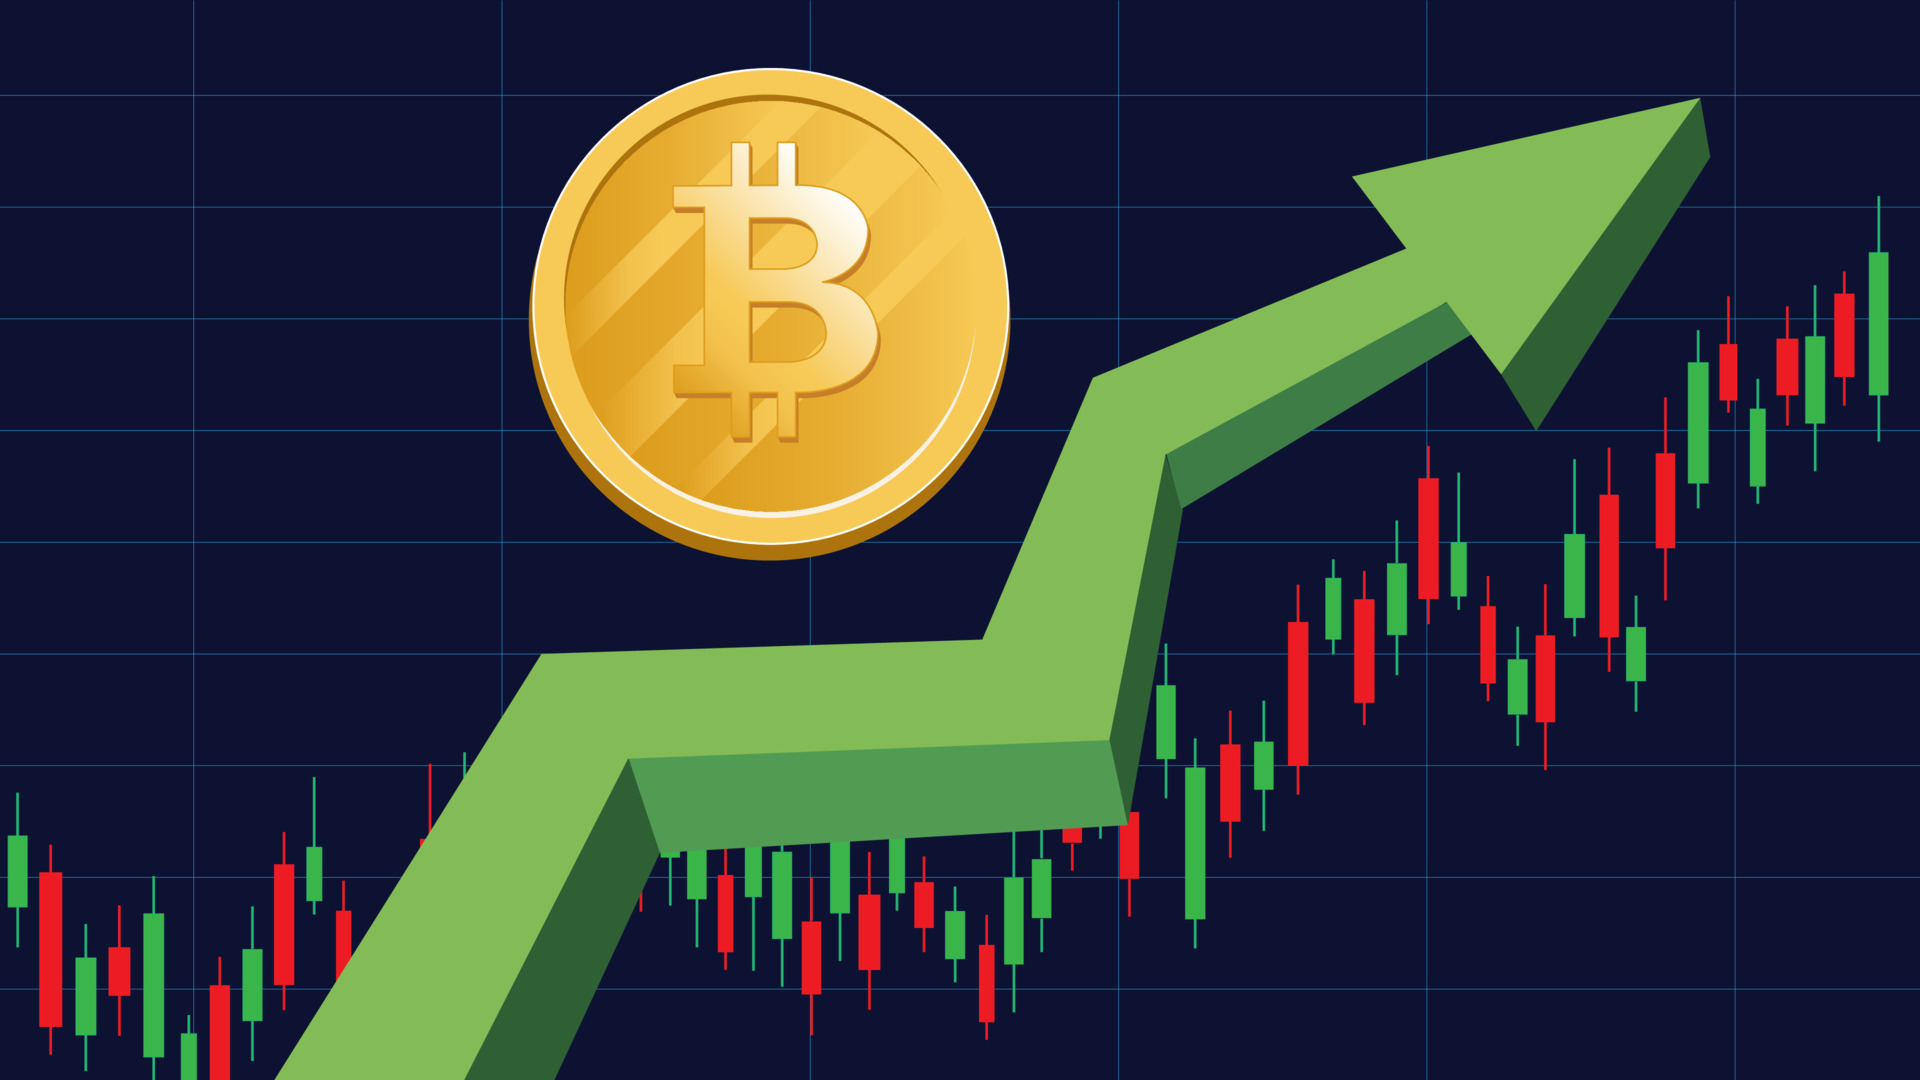 Bitcoin Price Touches $138K on Binance US: Here's Why